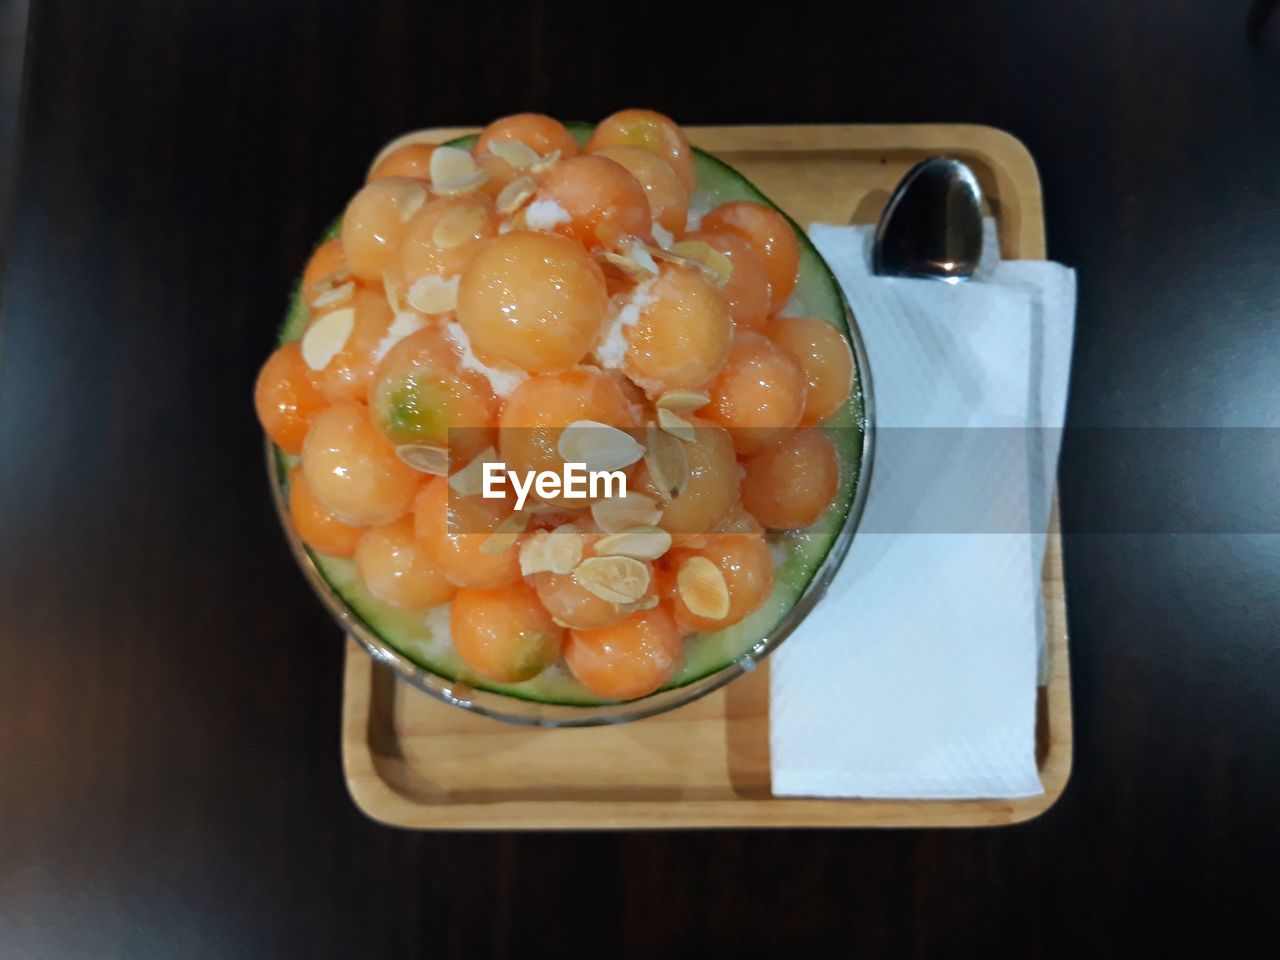 HIGH ANGLE VIEW OF FRUITS IN BOWL